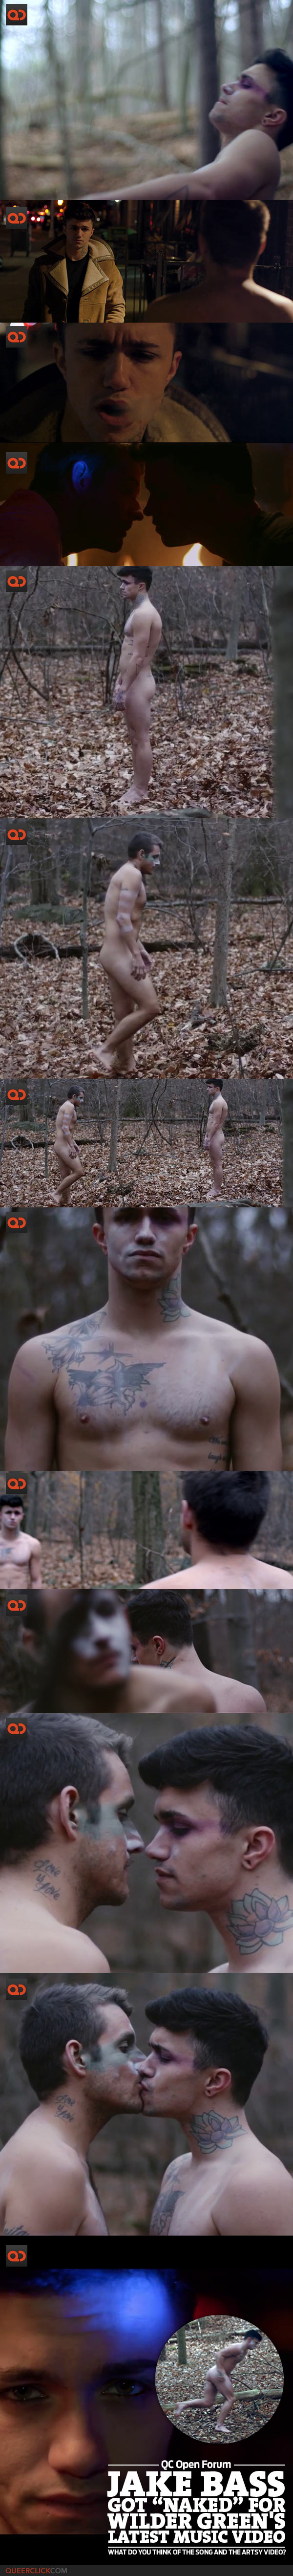 QC Open Forum: Porn Star Jake Bass Got “Naked” For Wilder Green's Latest Music Video - What Do You Think Of The Song And The Artsy Video?